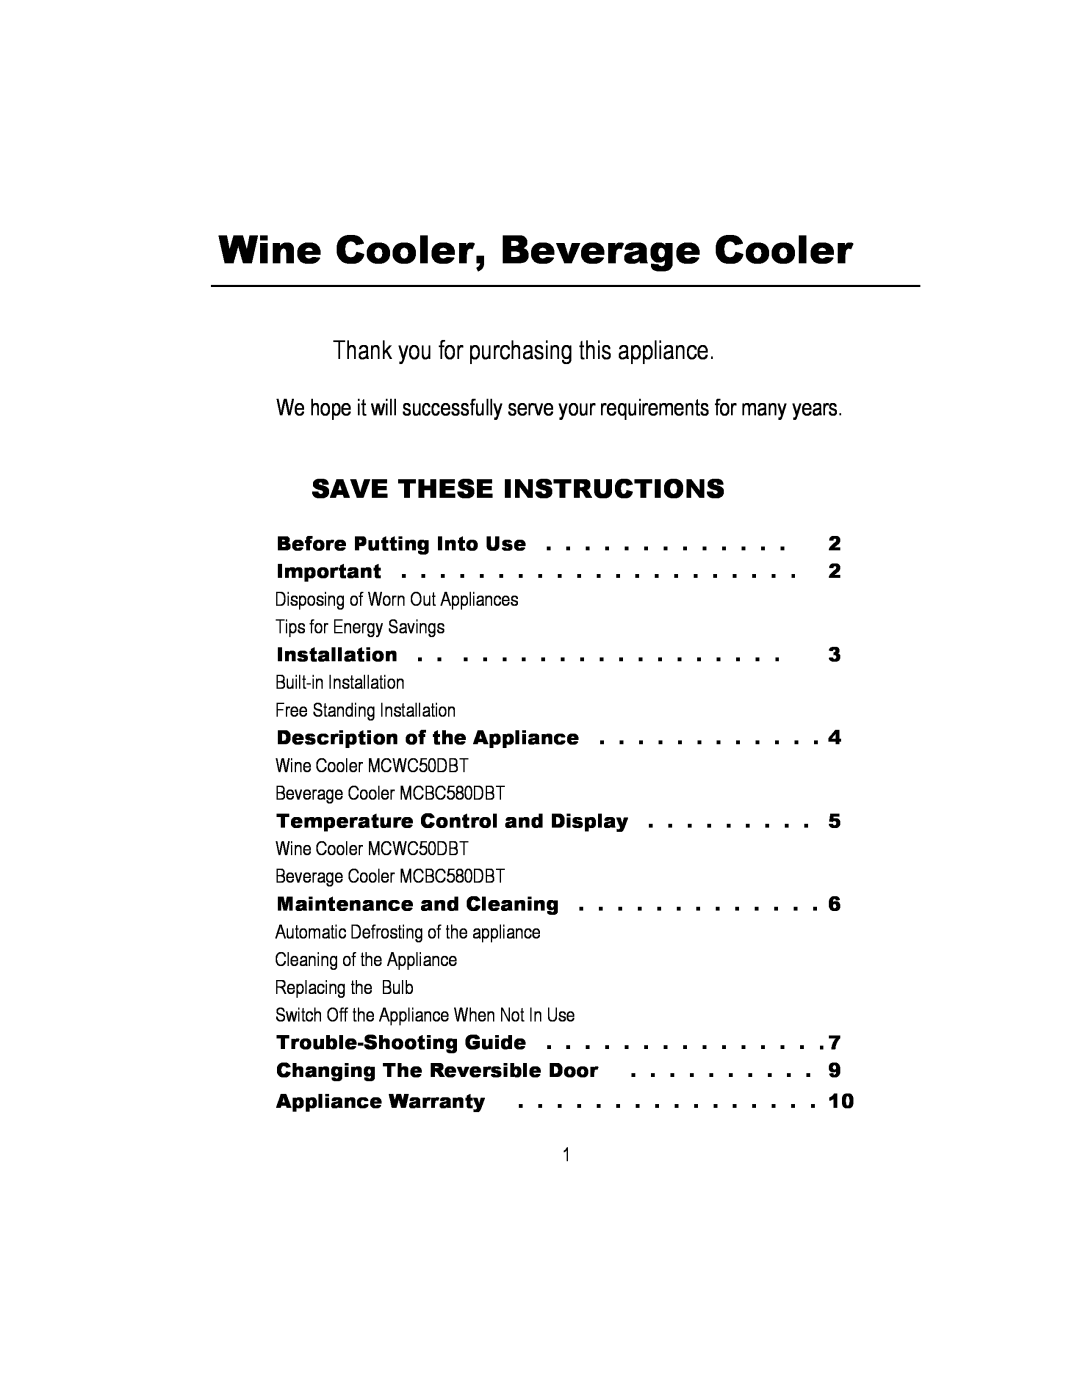 Magic Chef MCWC50DBT Wine Cooler, Beverage Cooler, Thank you for purchasing this appliance, Save These Instructions 